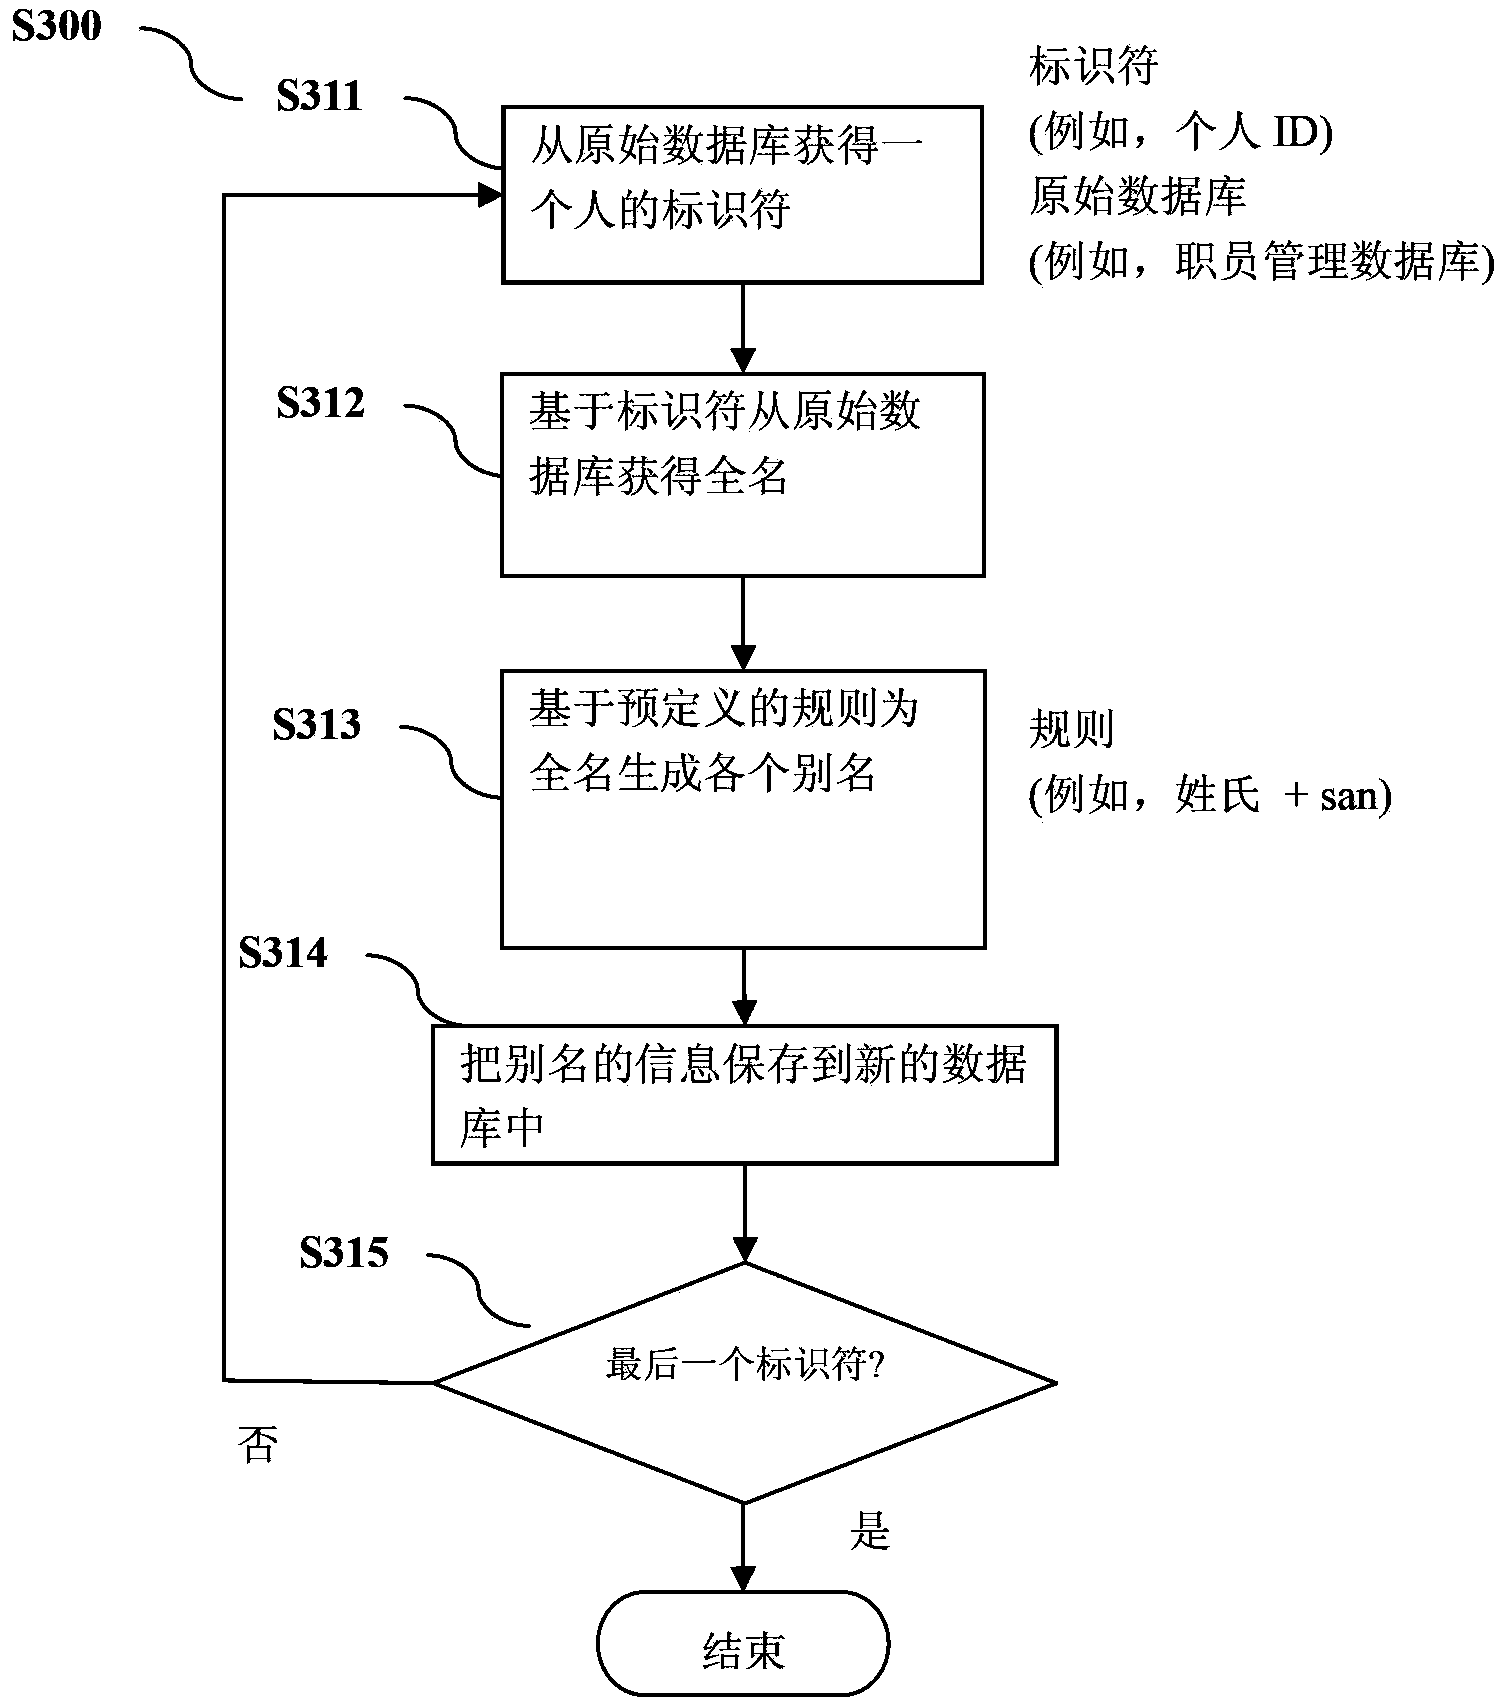 Method and device for identifying persons mentioned in conversation